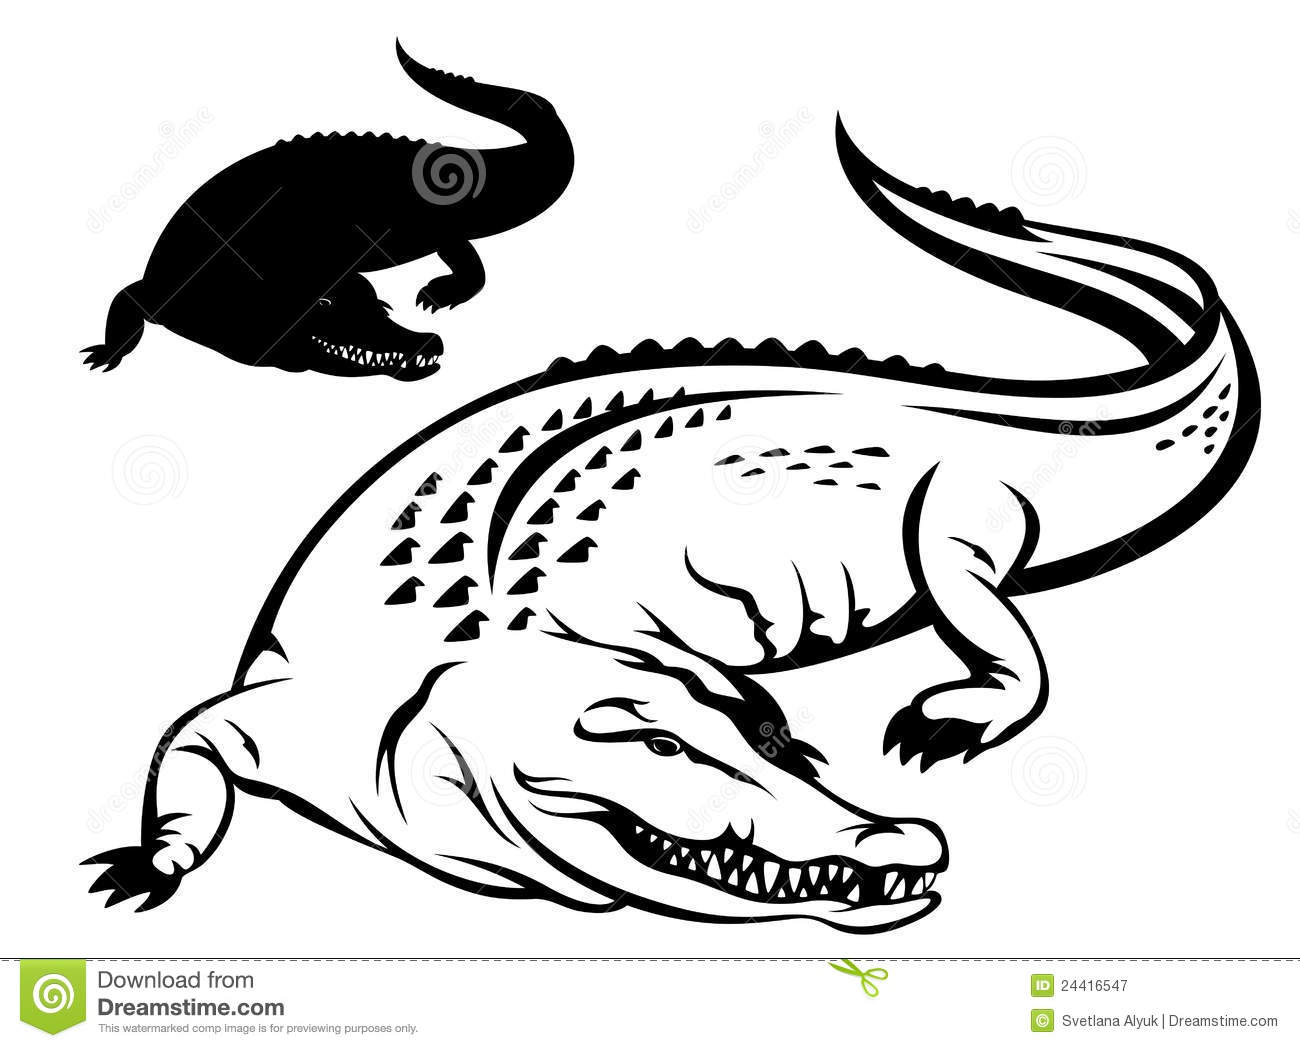 Crocodile Illustration   Black And White Outline And Silhouette